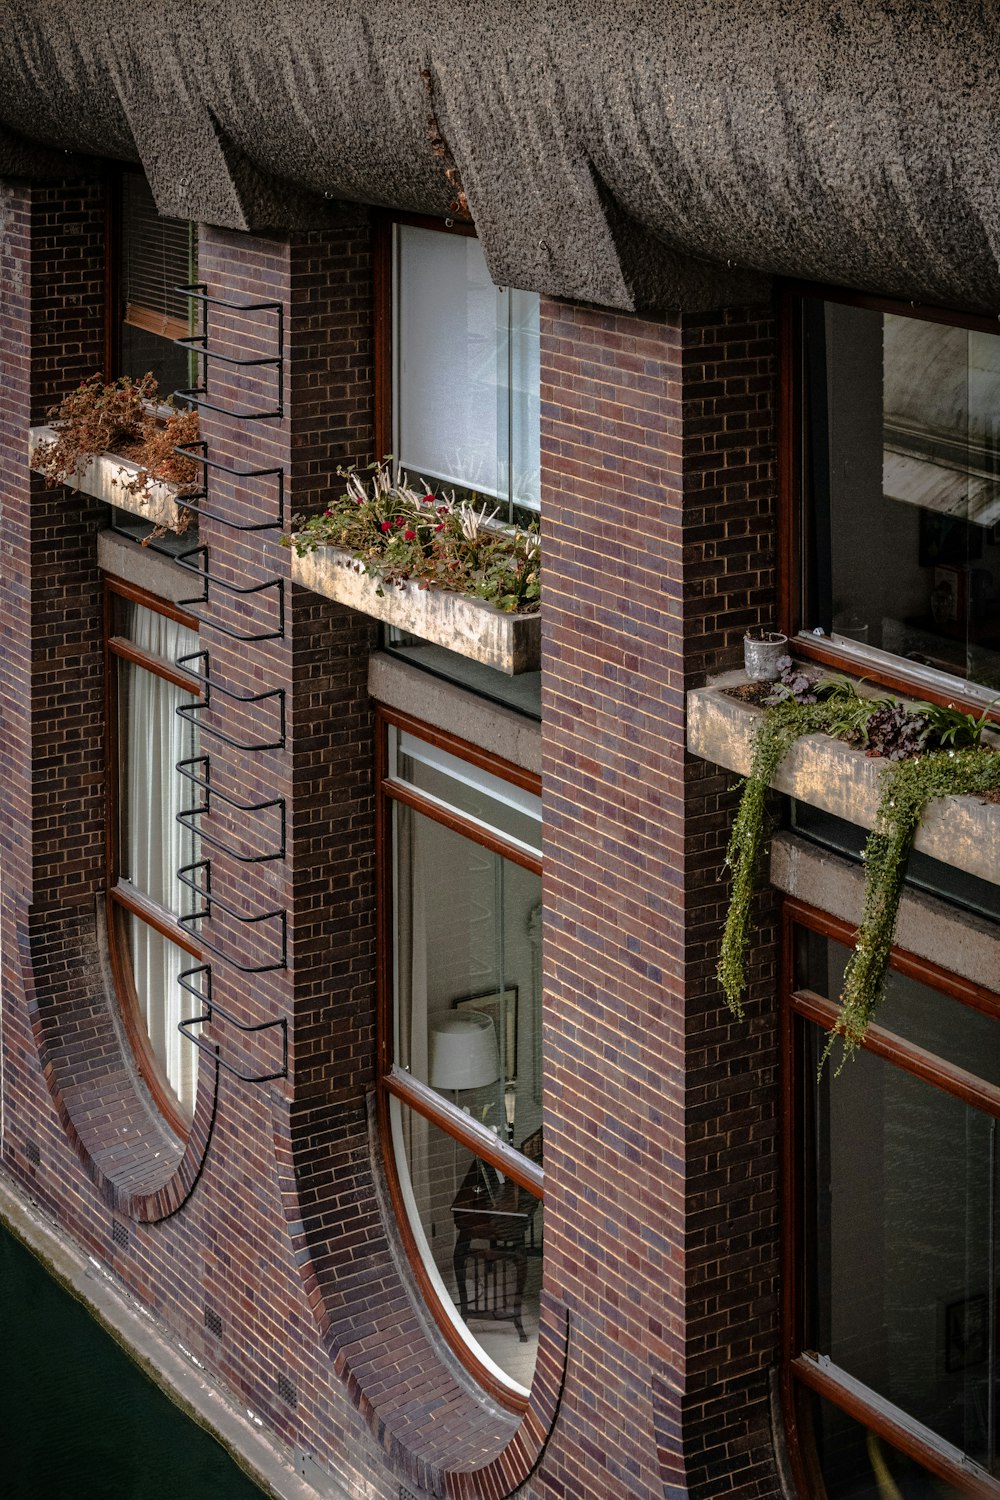 a brick building with plants in the windows